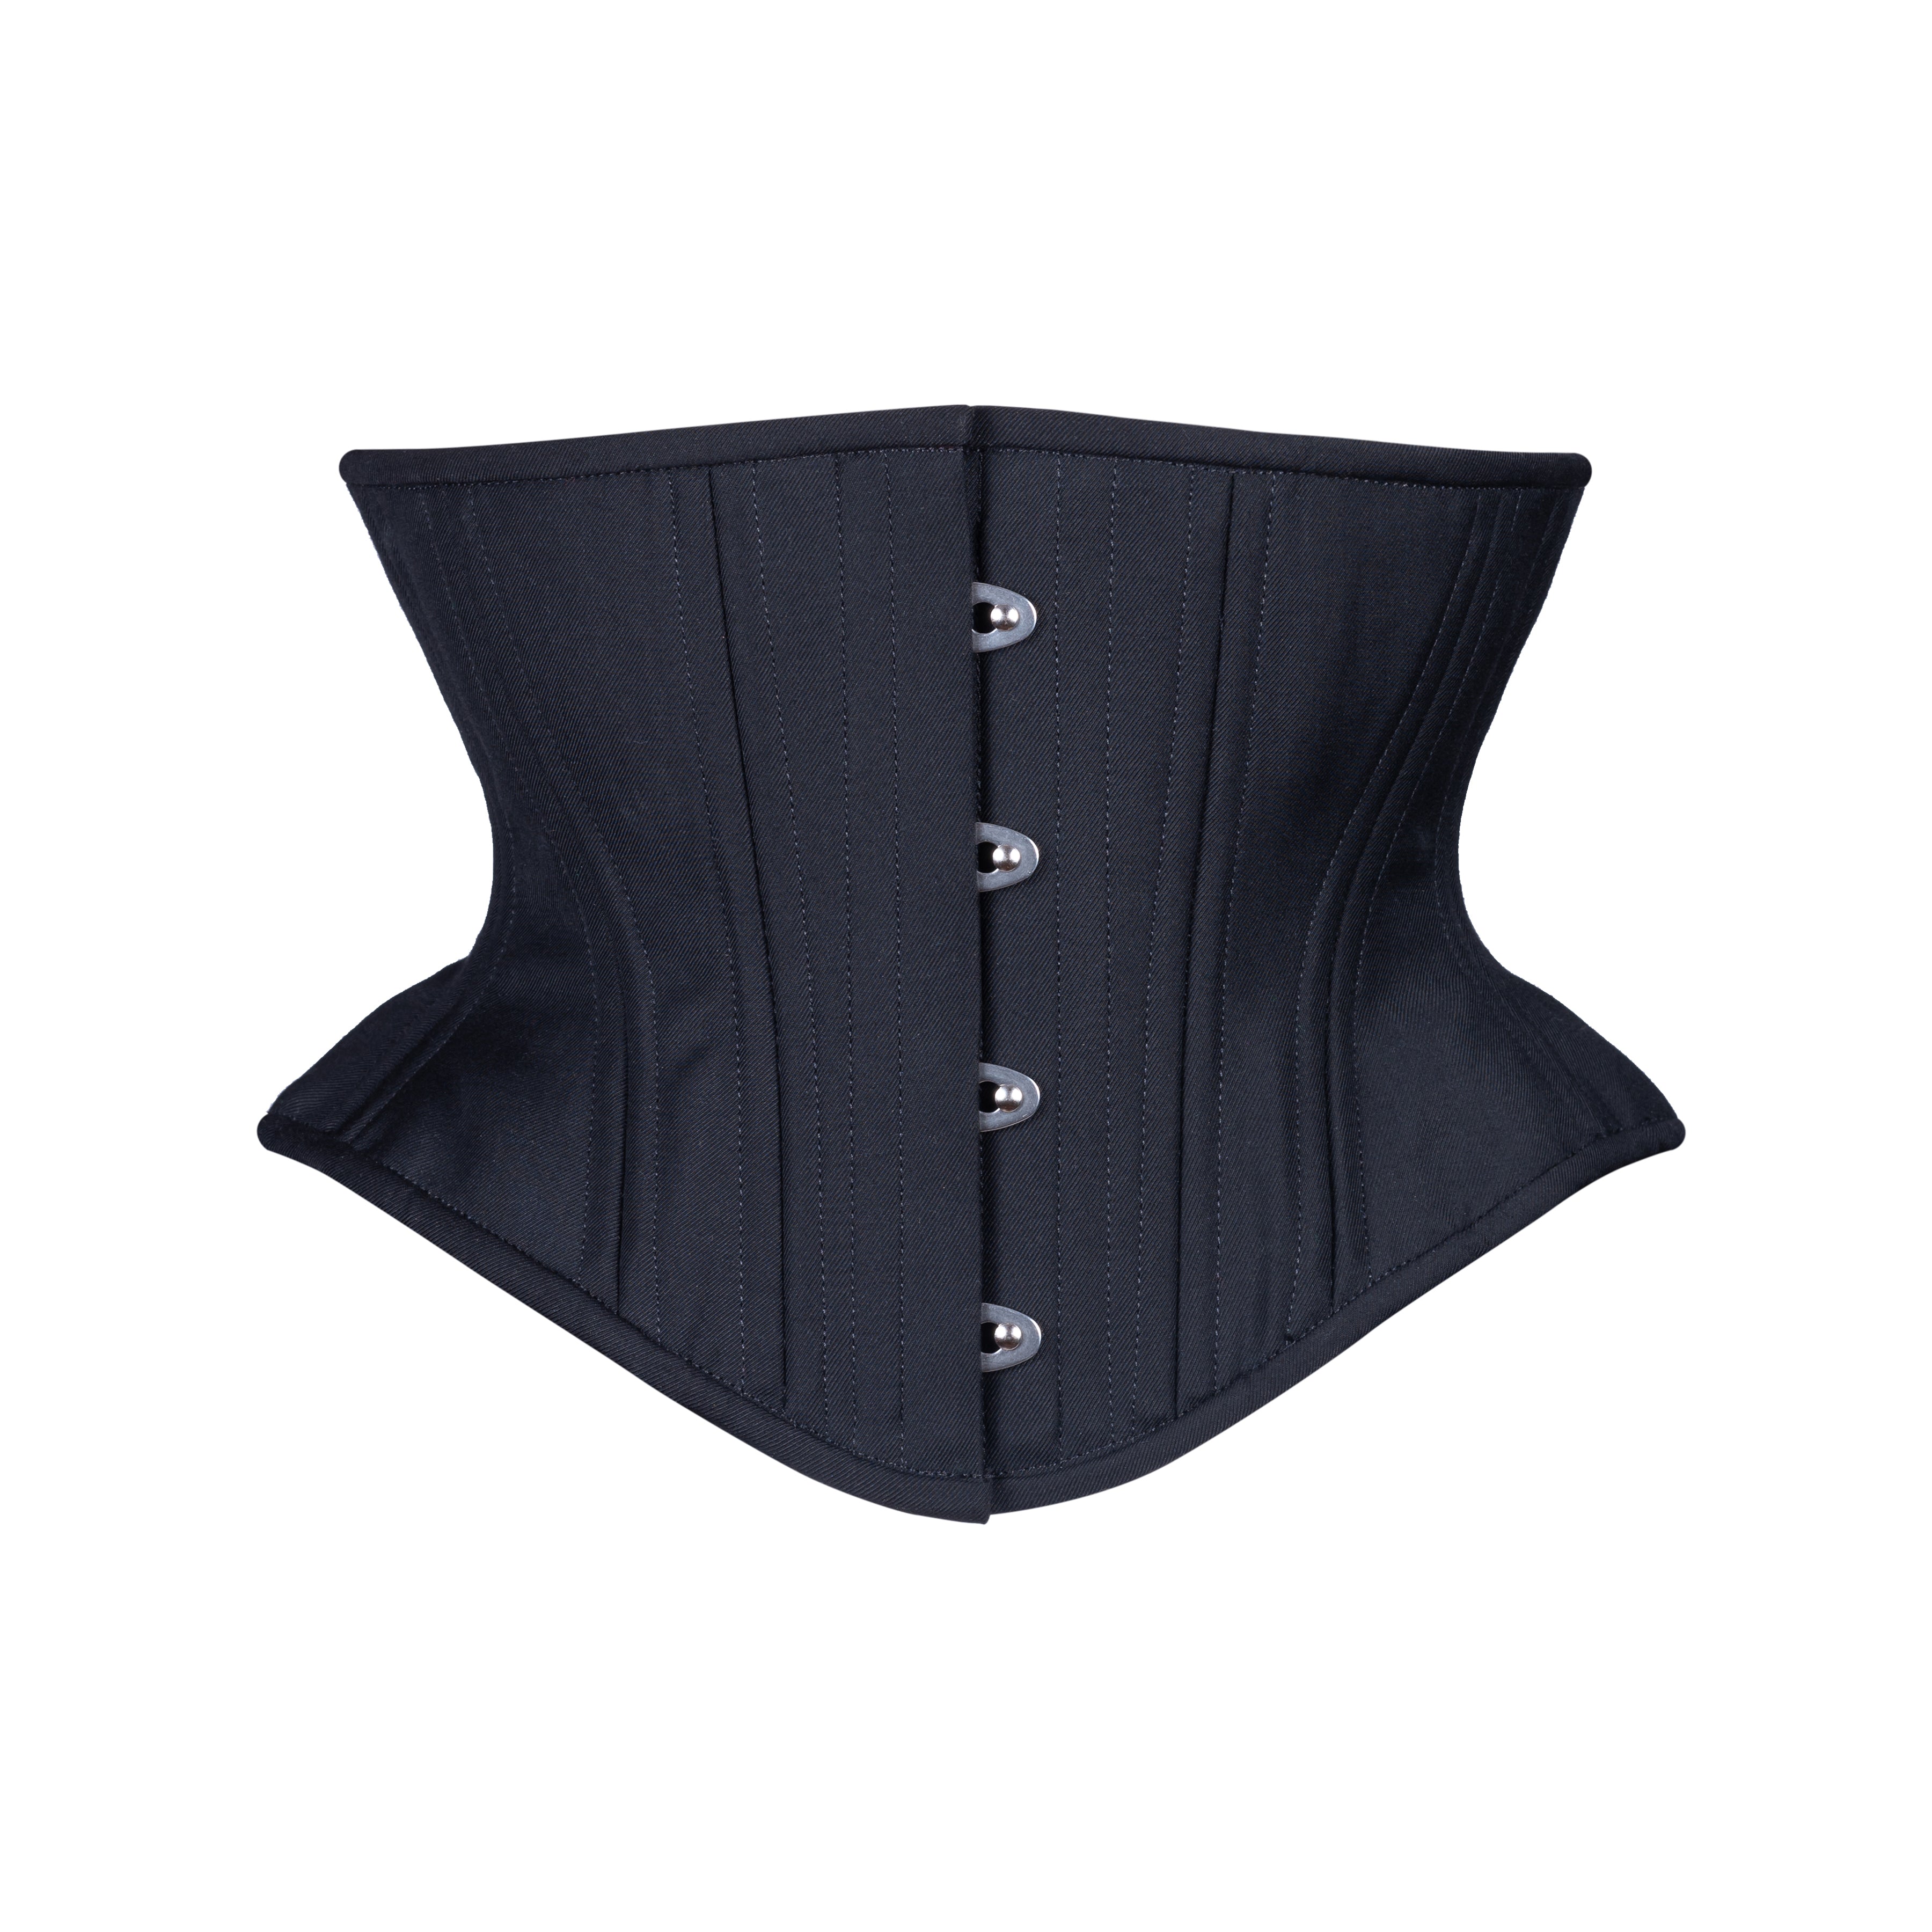 Newbie here, been using latex waist cincher and recently started getting  pain in here, more details in comments : r/waisttraining